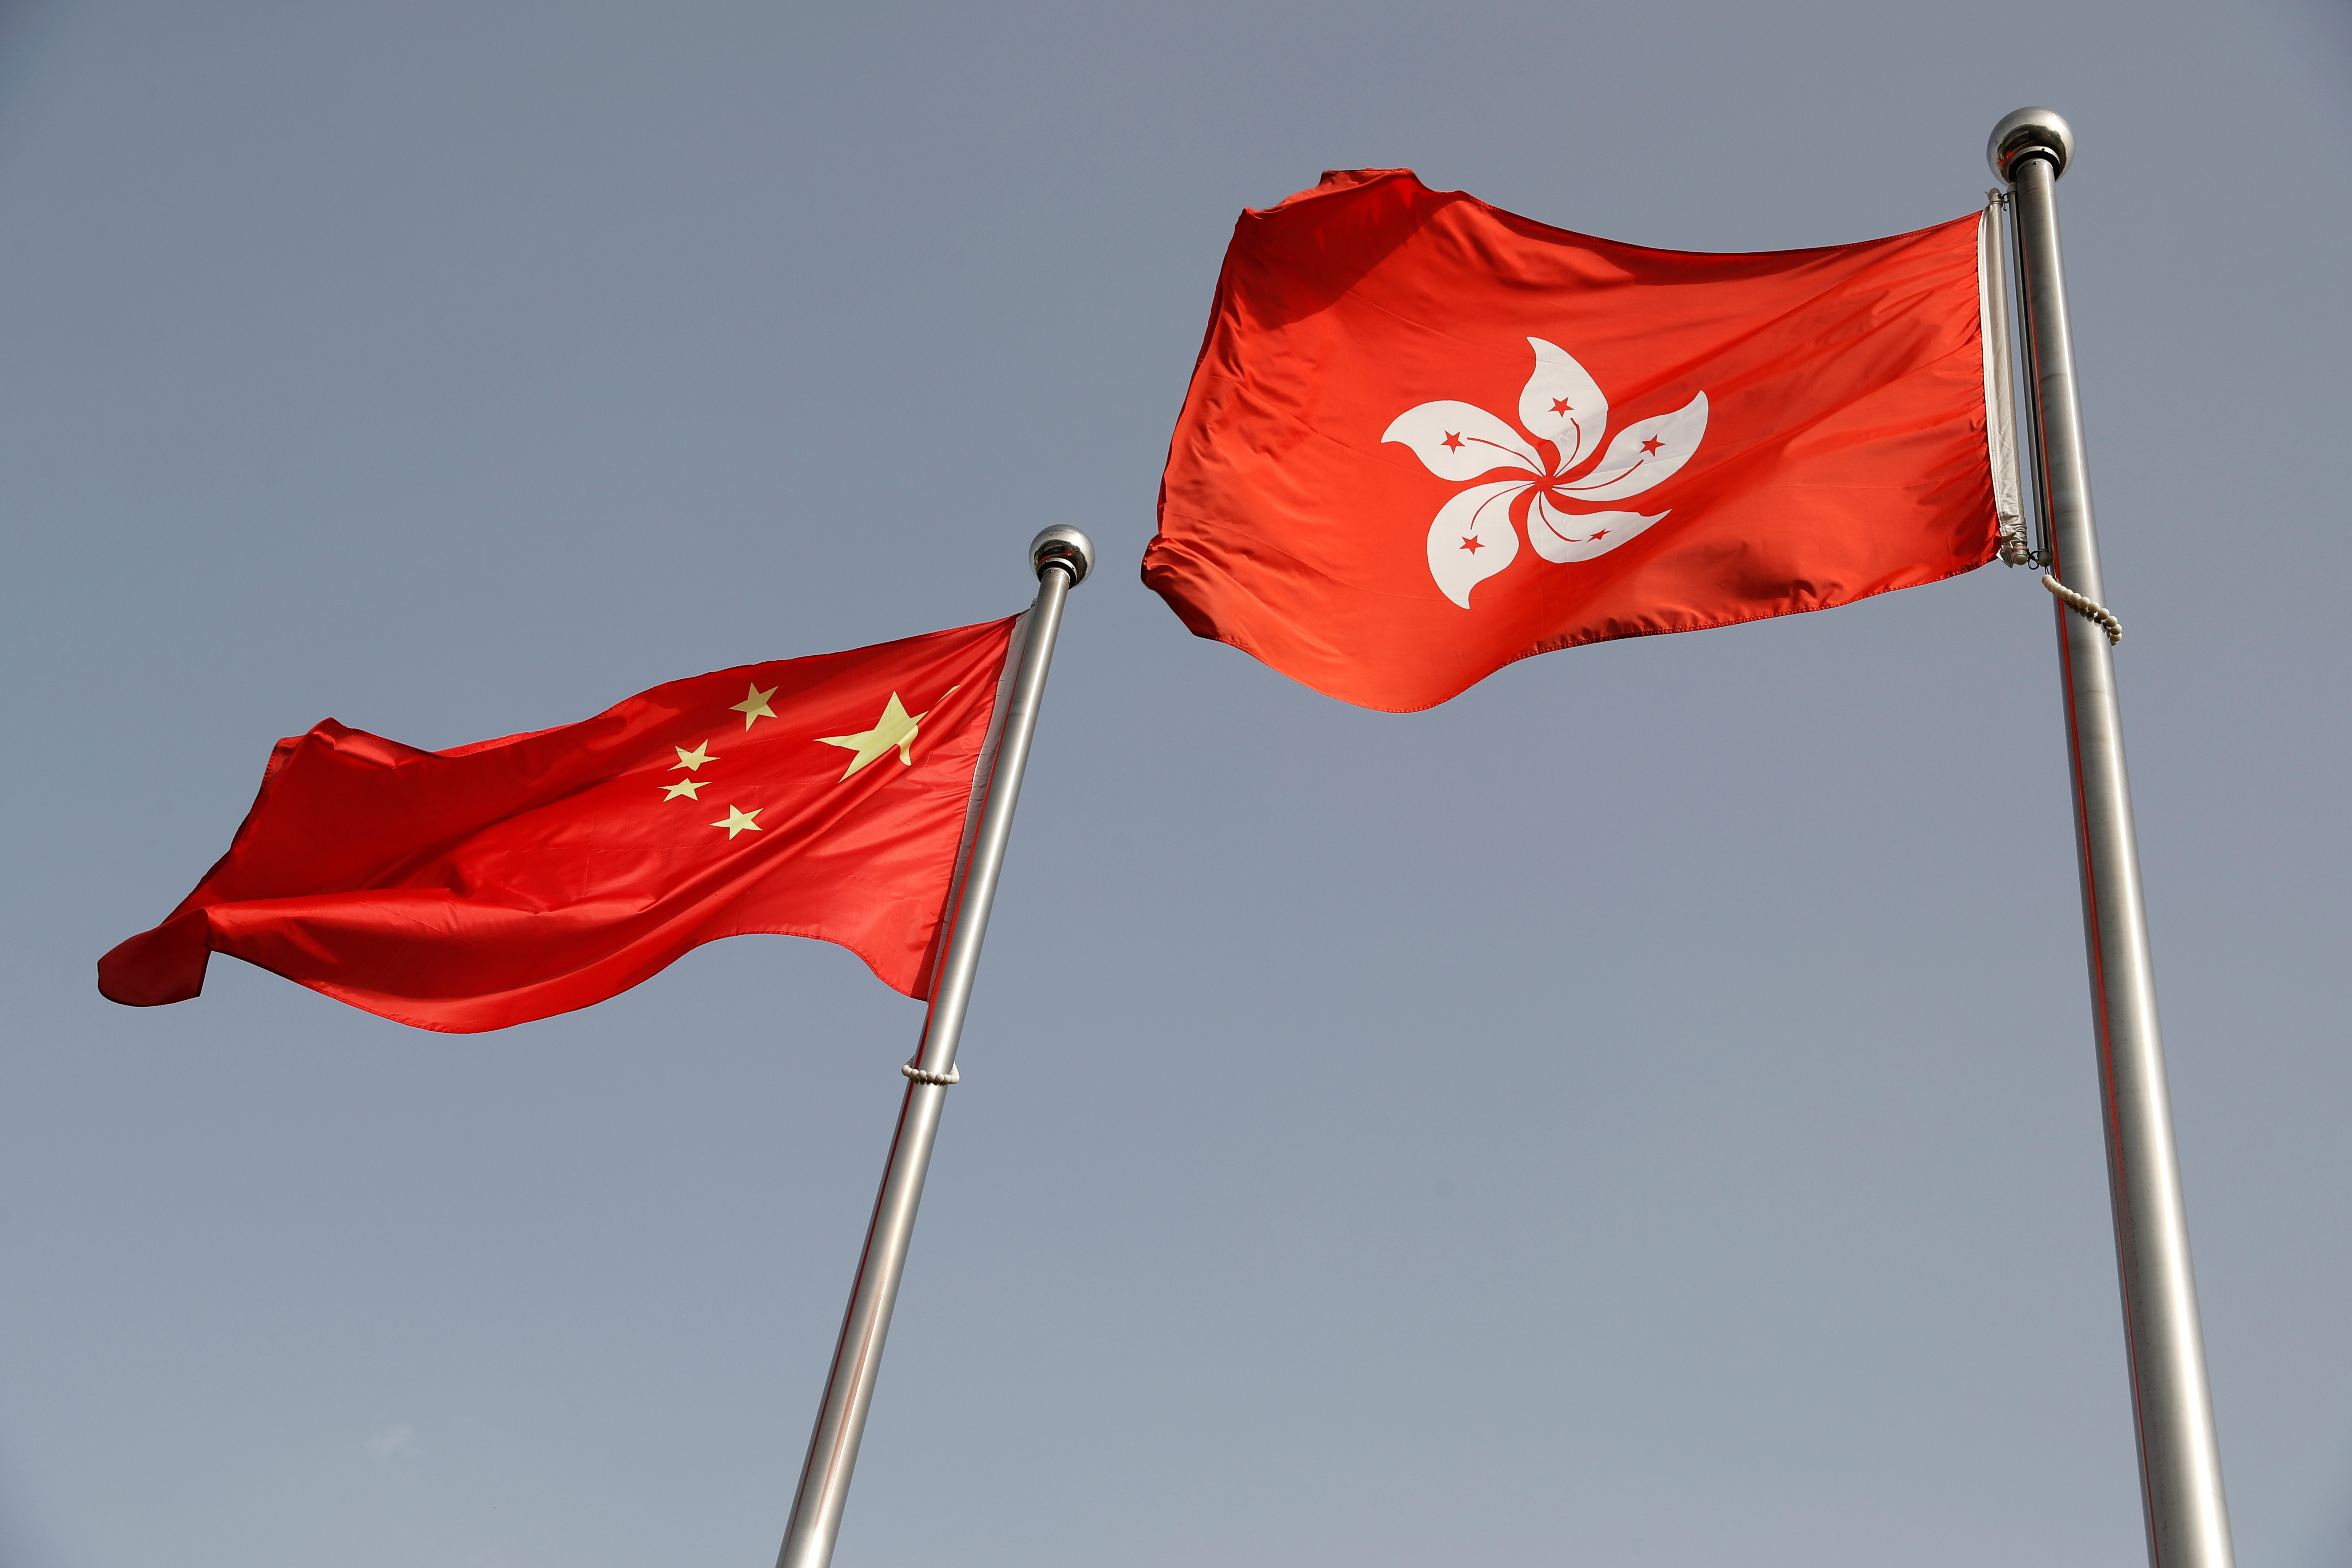 The Chinese and Hong Kong flags flutter at the office of the Government of the Hong Kong Special Administrative Region, ahead of a news conference held by Hong Kong Chief Executive Carrie Lam, in Beijing